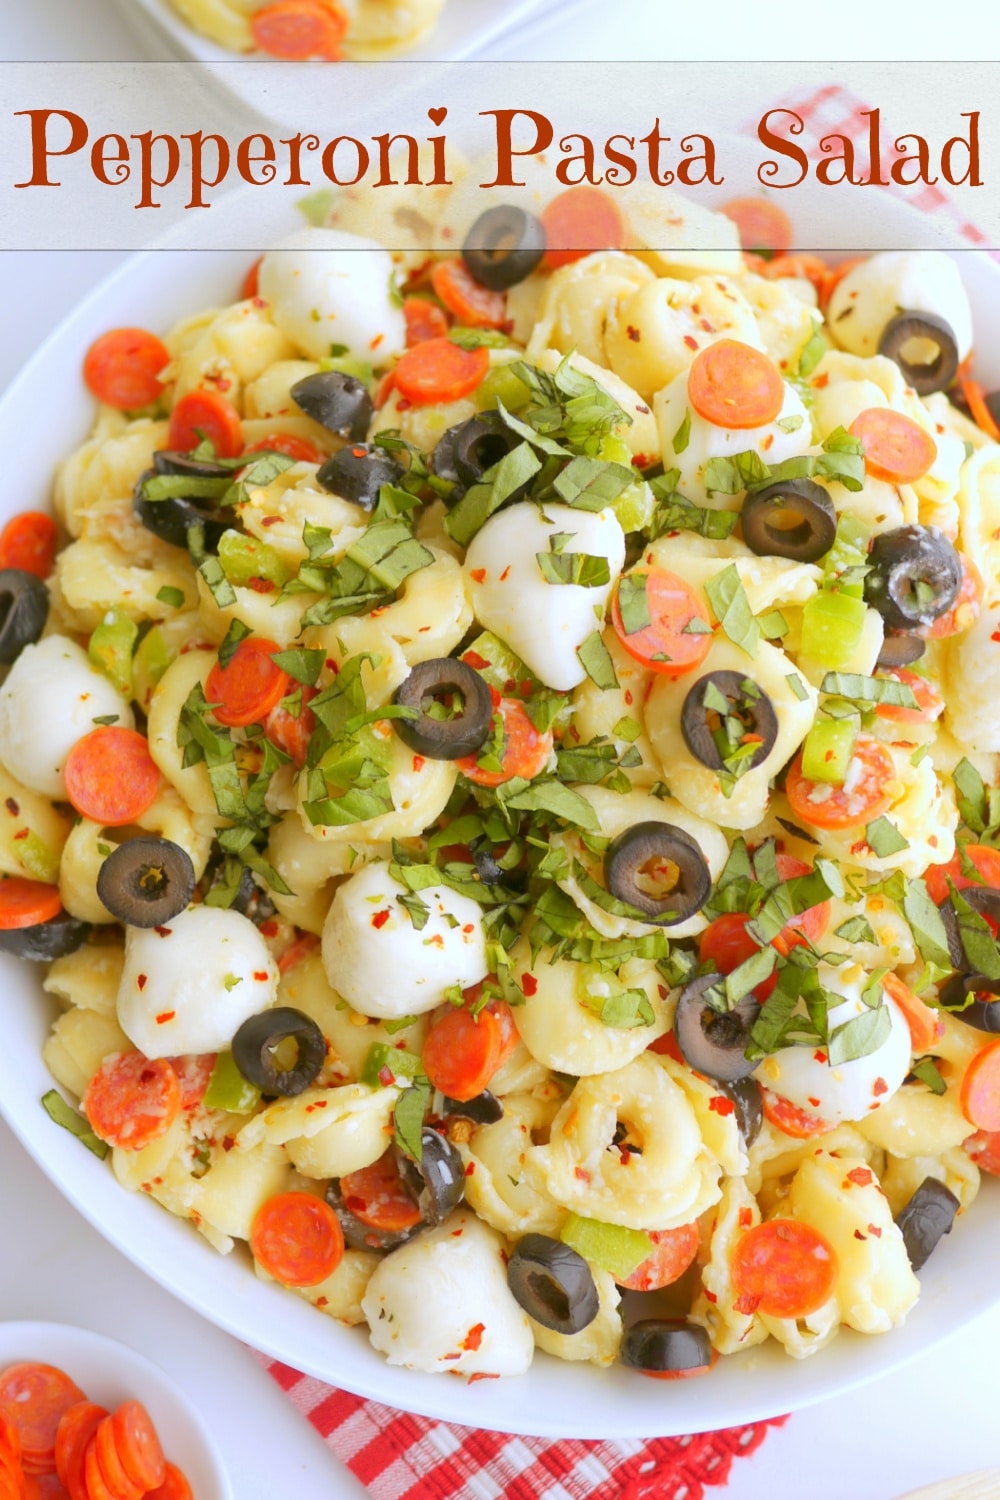 Bursting with bold flavors and has a pizza-inspired twist, this Pepperoni Pasta Salad is the perfect dish to satisfy your cravings. The tender pasta, juicy tomatoes, savory pepperoni, and zesty Italian dressing tie it all together in one delicious pizza pasta salad recipe.  via @cmpollak1